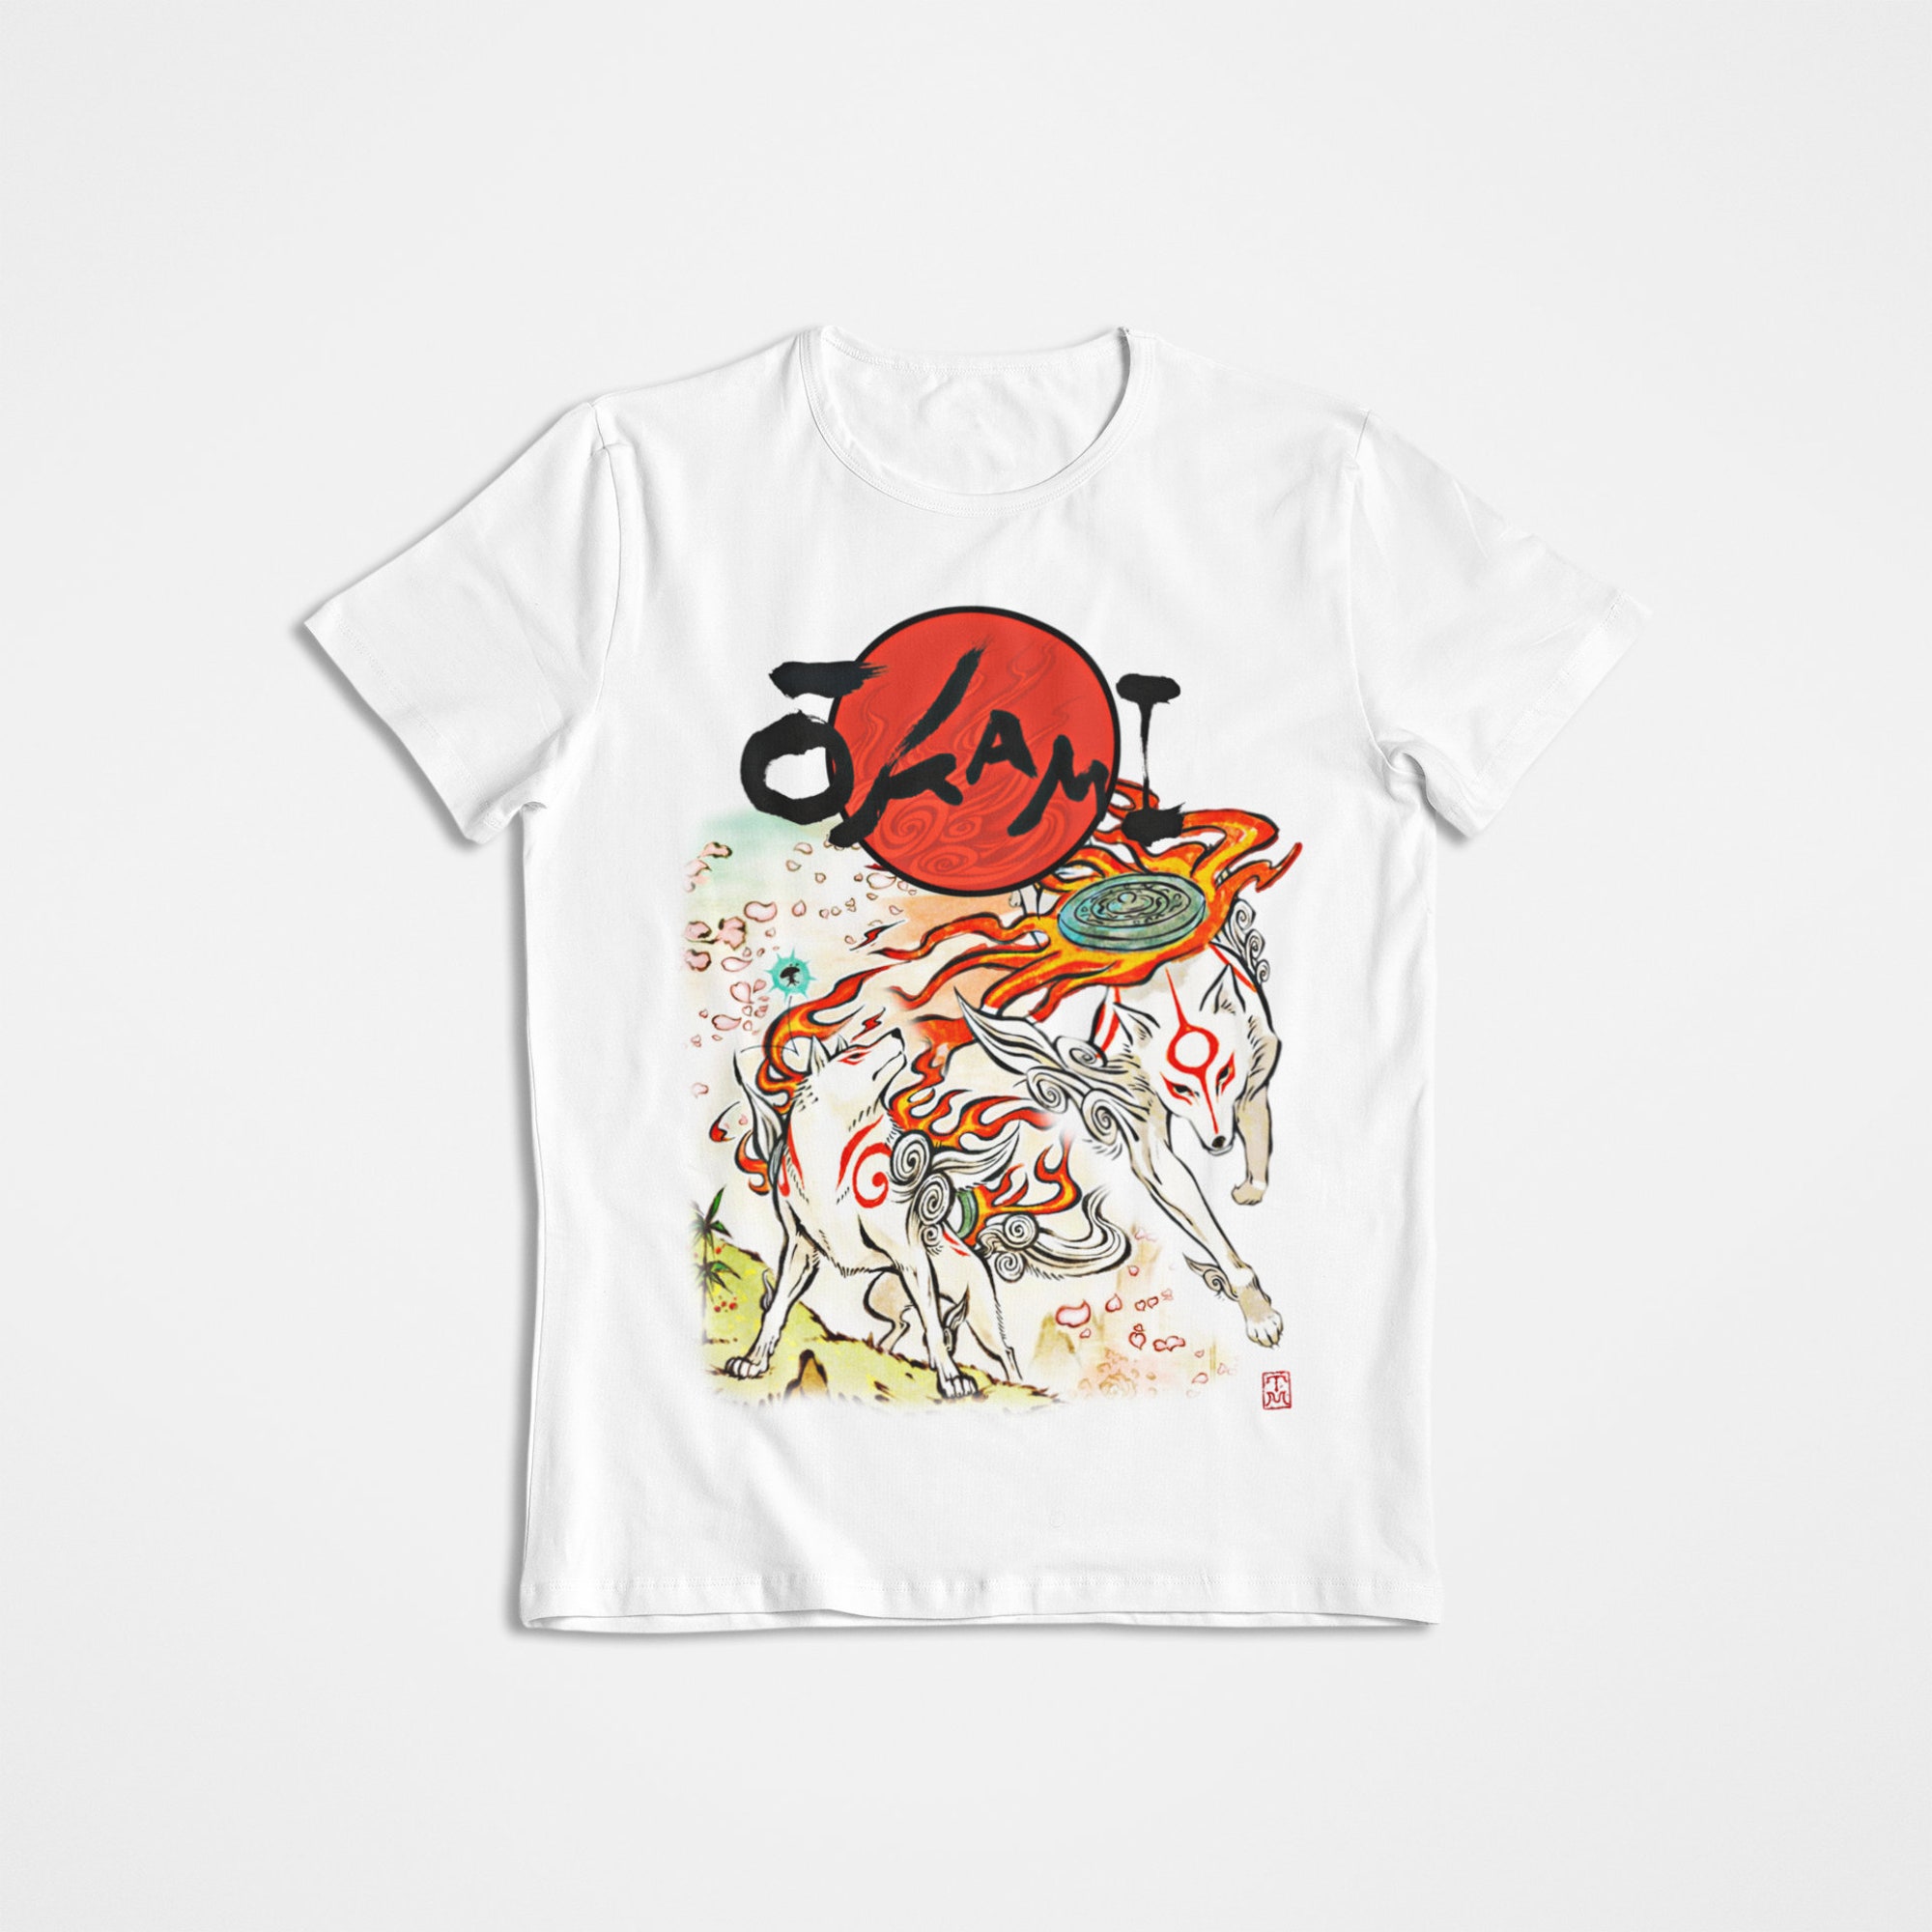 Discover Vintage Graphic T-Shirt, Graphic Tee ~ Okami, Anime